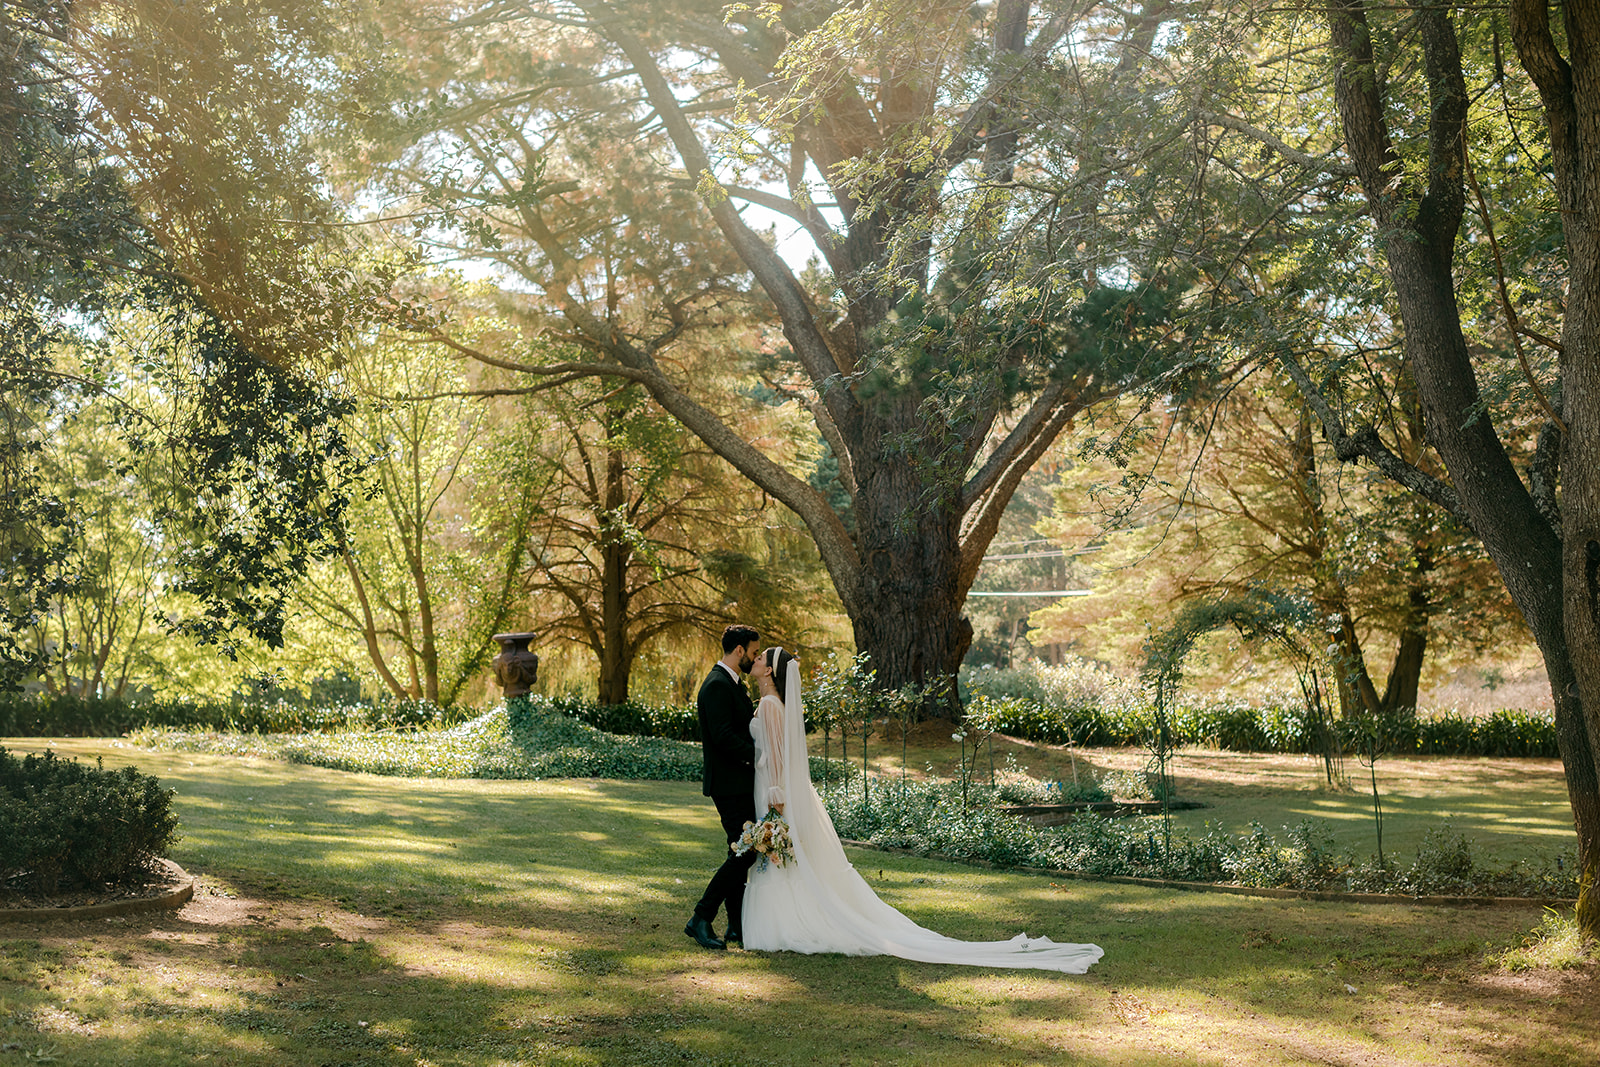 Portrait of bride & groom in an English-inspired garden during their elegant country wedding.